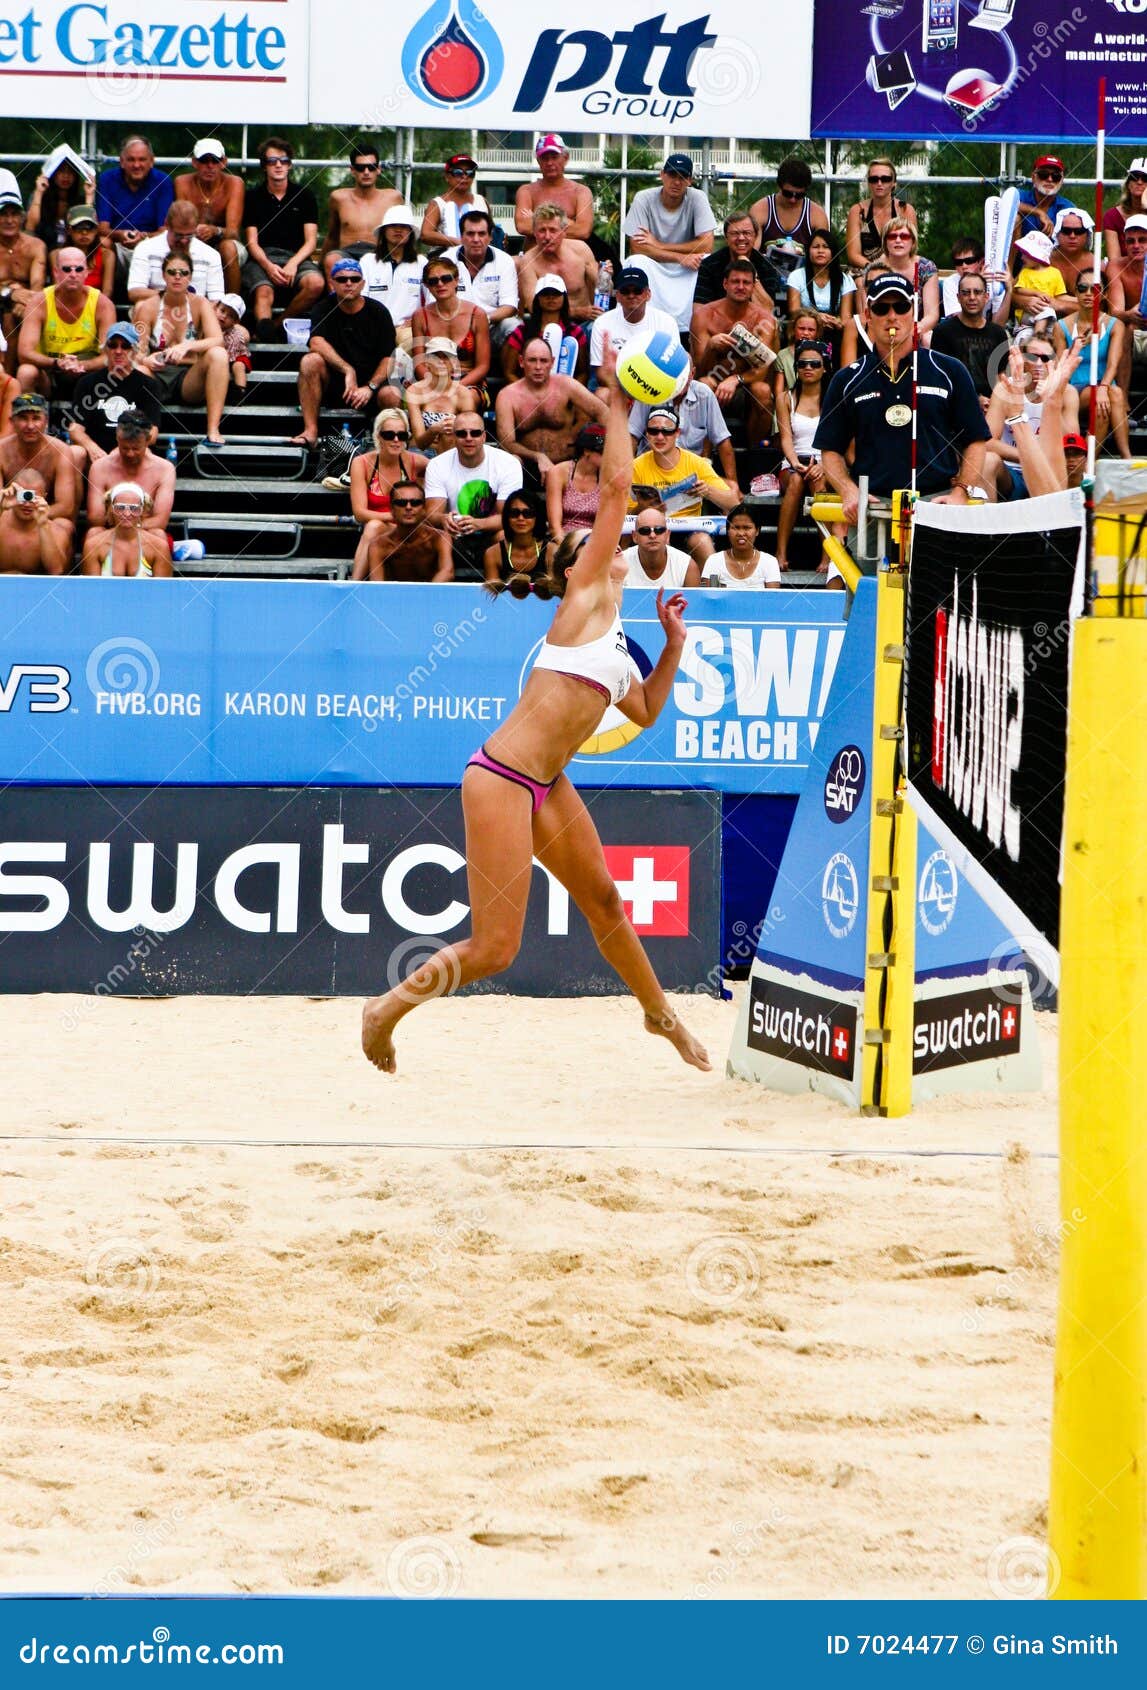 BEACH VOLLEY - SWATCH FIVB BEACH VOLLEY WORLD TOUR 2008